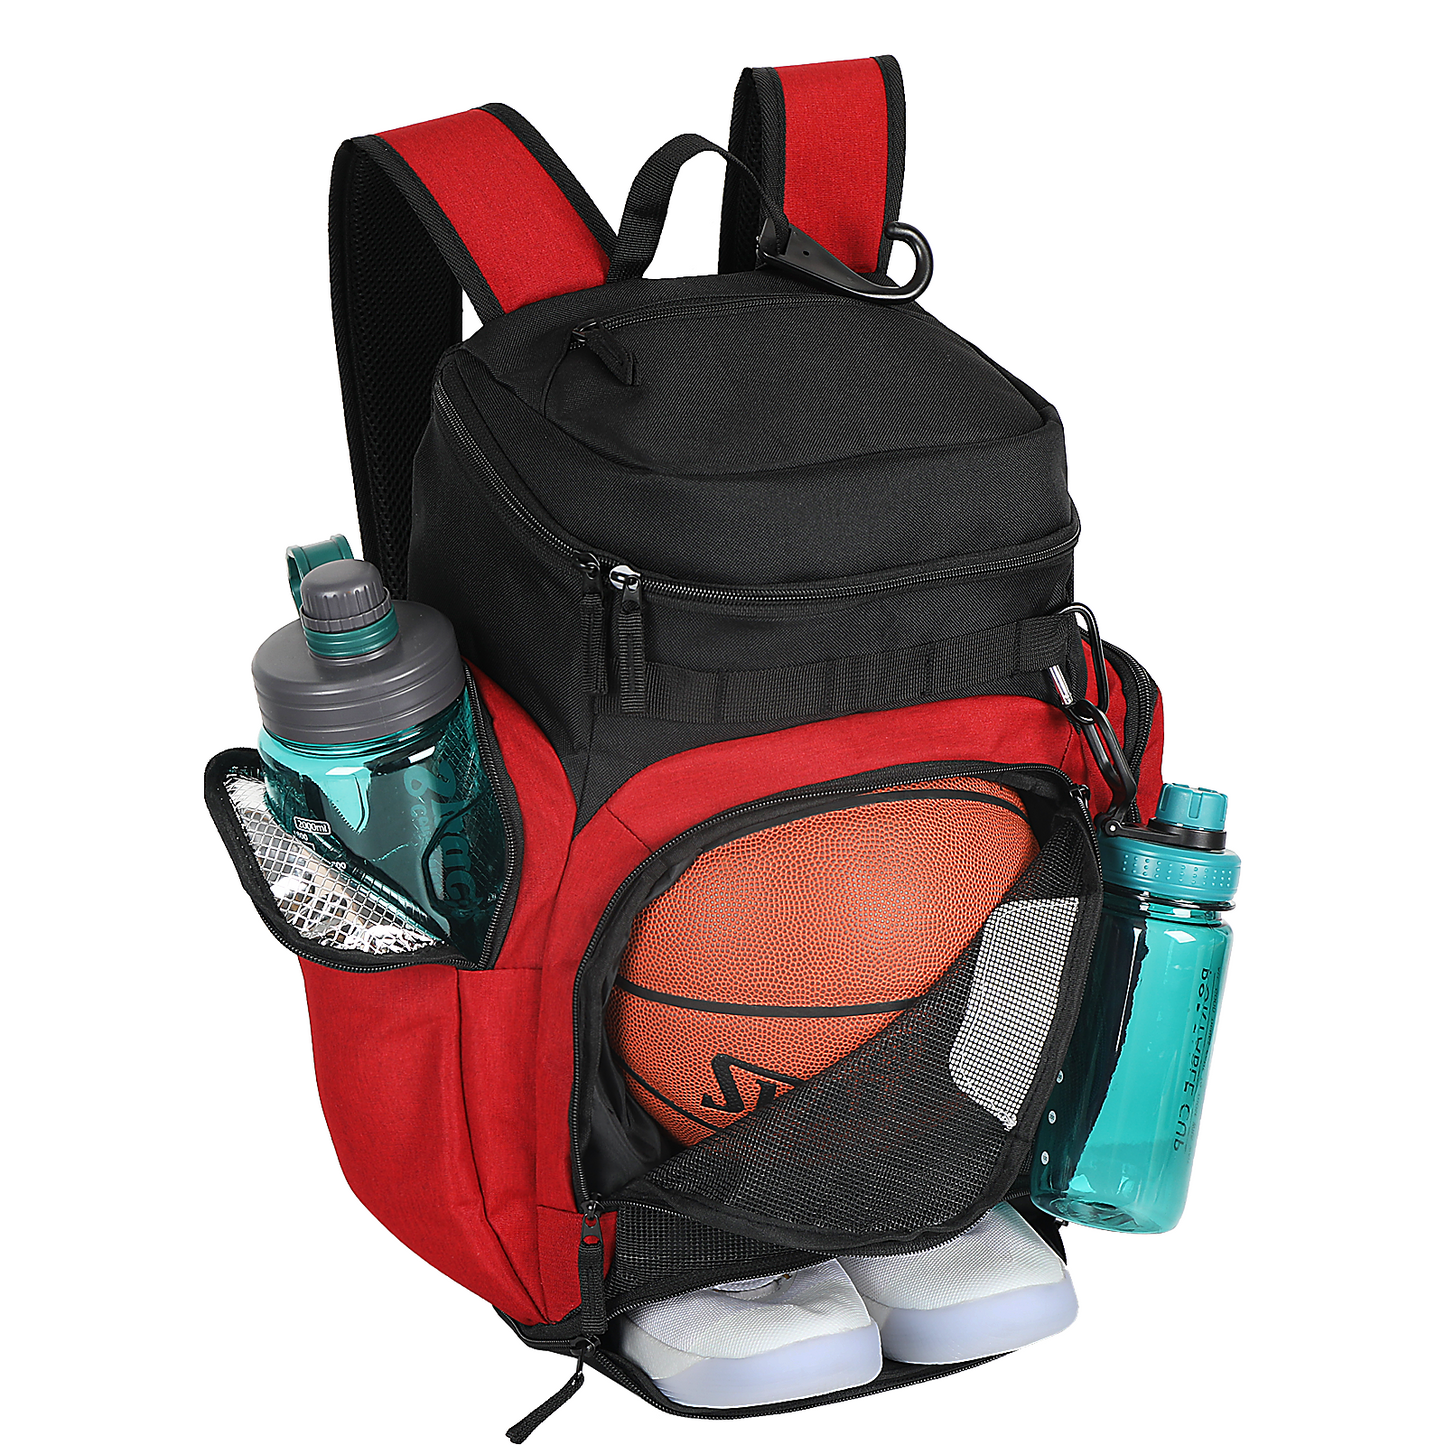 LARIPOP Basketball Backpack Large Sports Bag, Gym Bag with Ball Compartment and Shoe Compartment to Store Sports Shoes Water Bottles Laptops and Daily Necessities, Widely Used in Basketball, Soccer